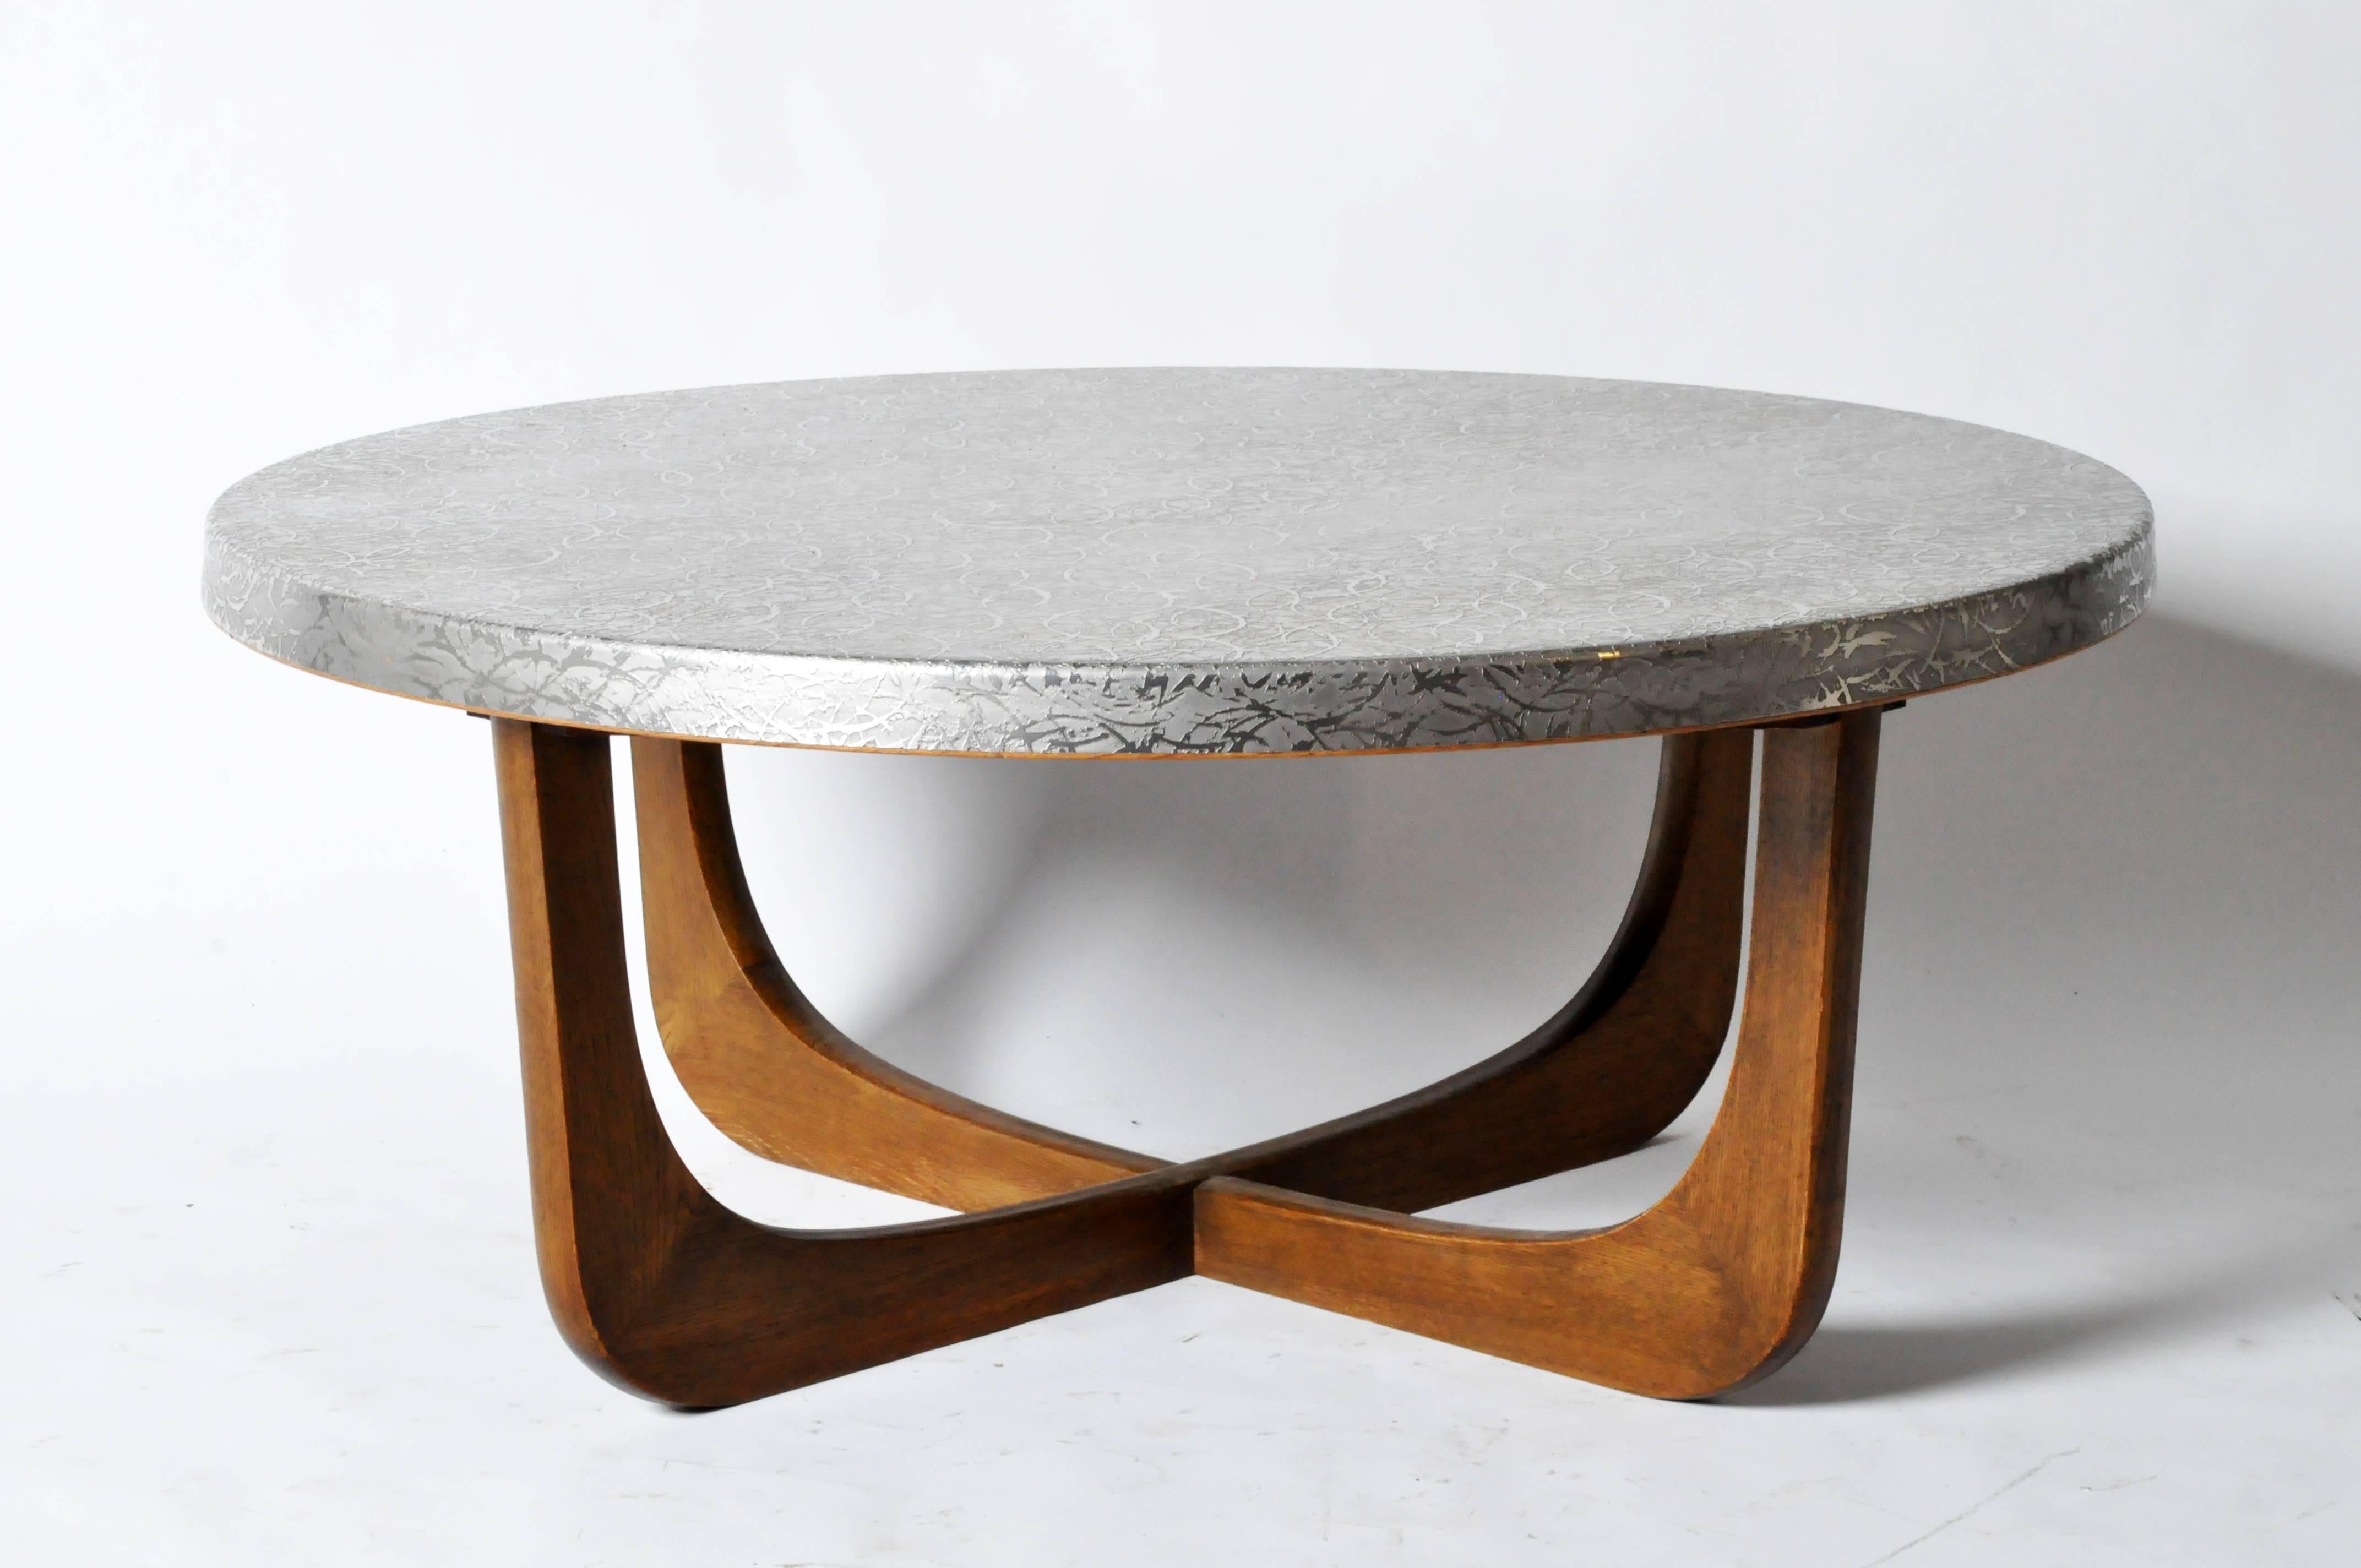 This vintage coffee table features a circular, textured aluminum top that is supported by U-shaped or ‘boomerang’ legs, which join to create an X-form base.